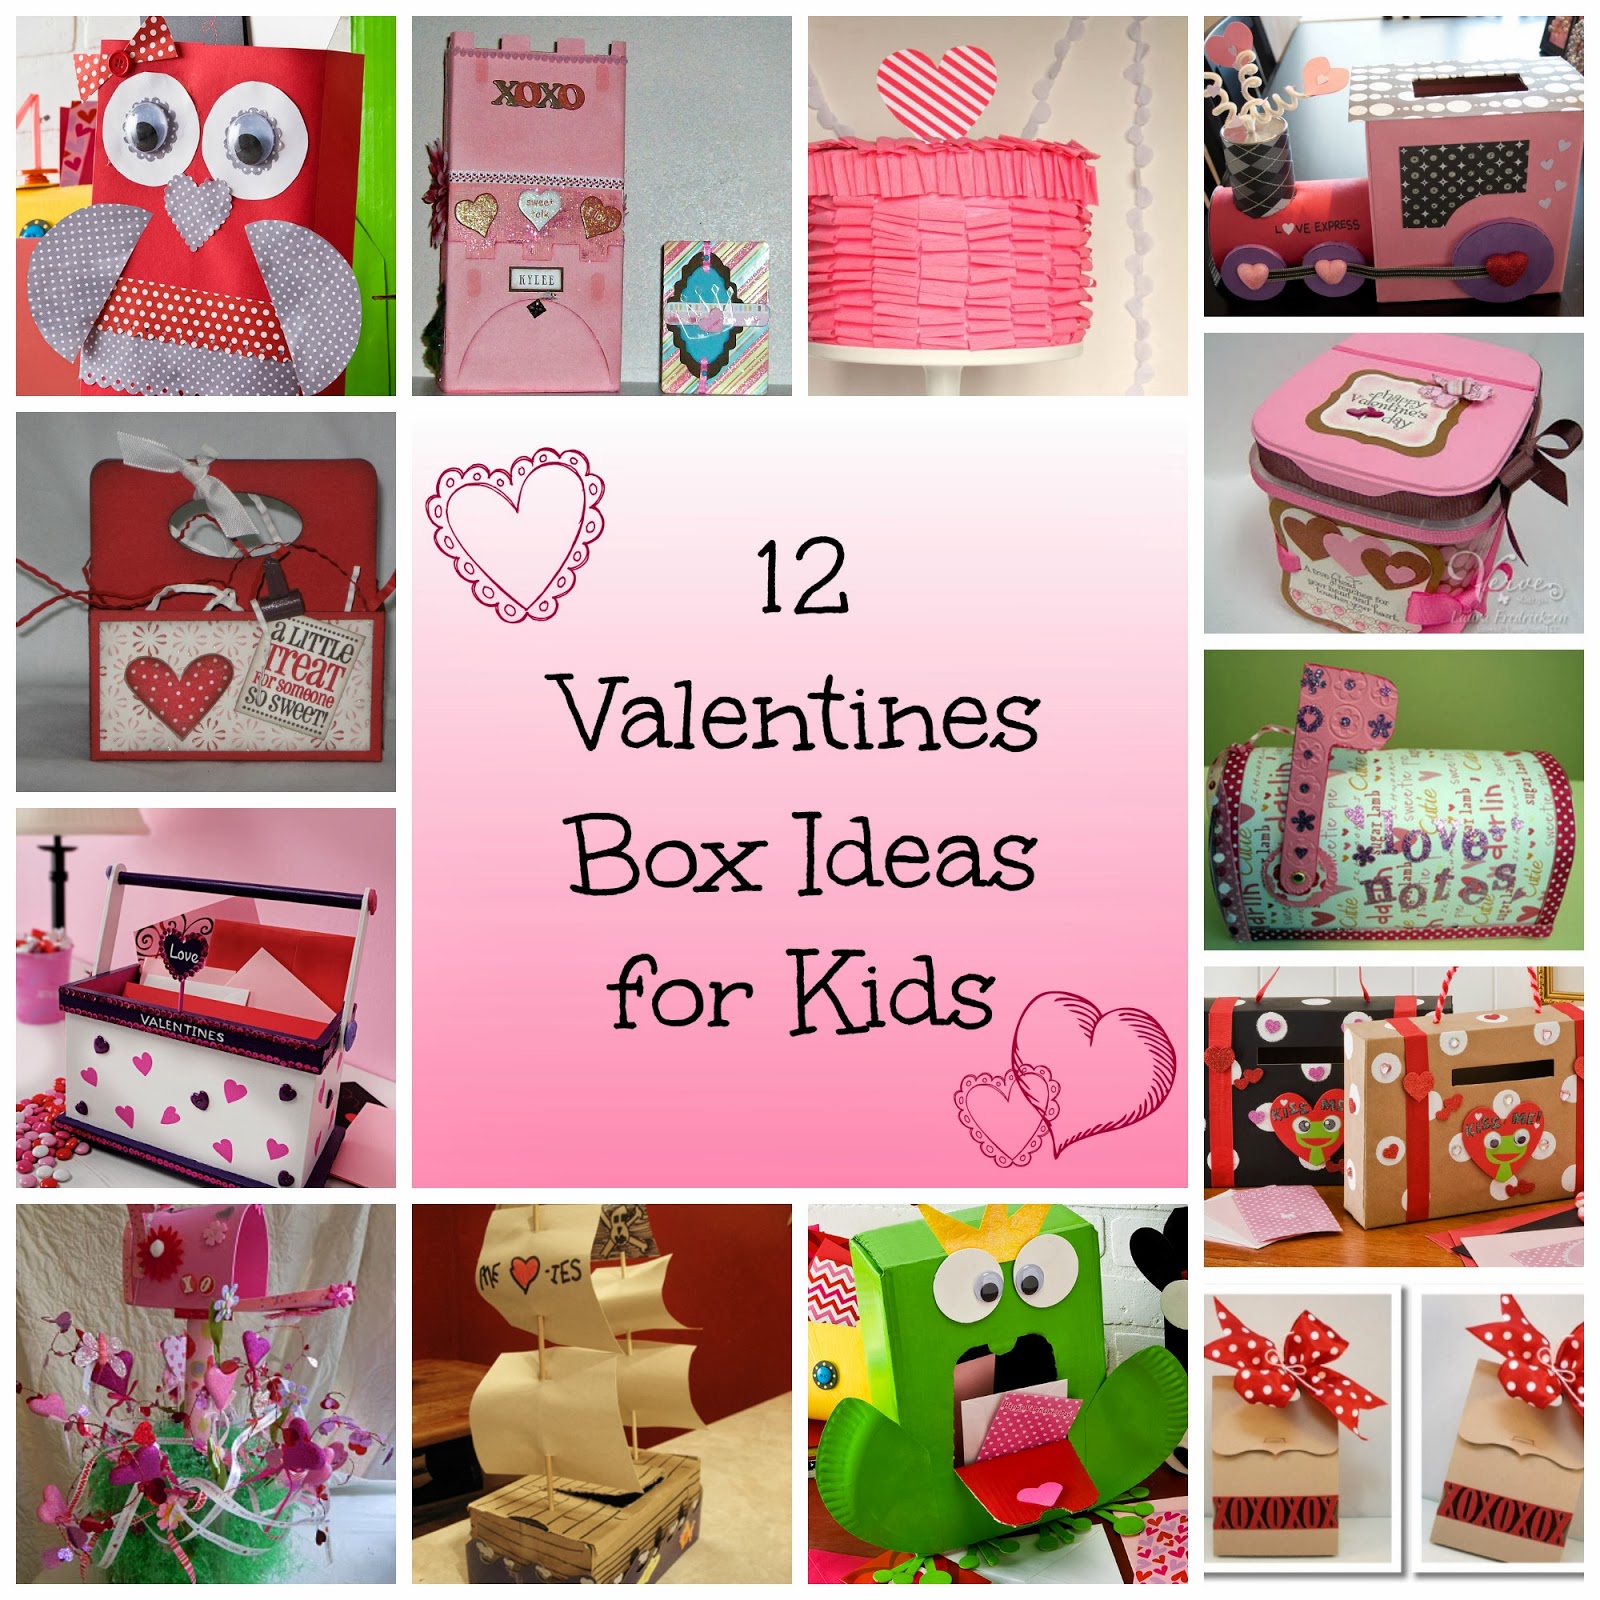 It's a Princess Thing: 12 Valentine Box Ideas for Kids